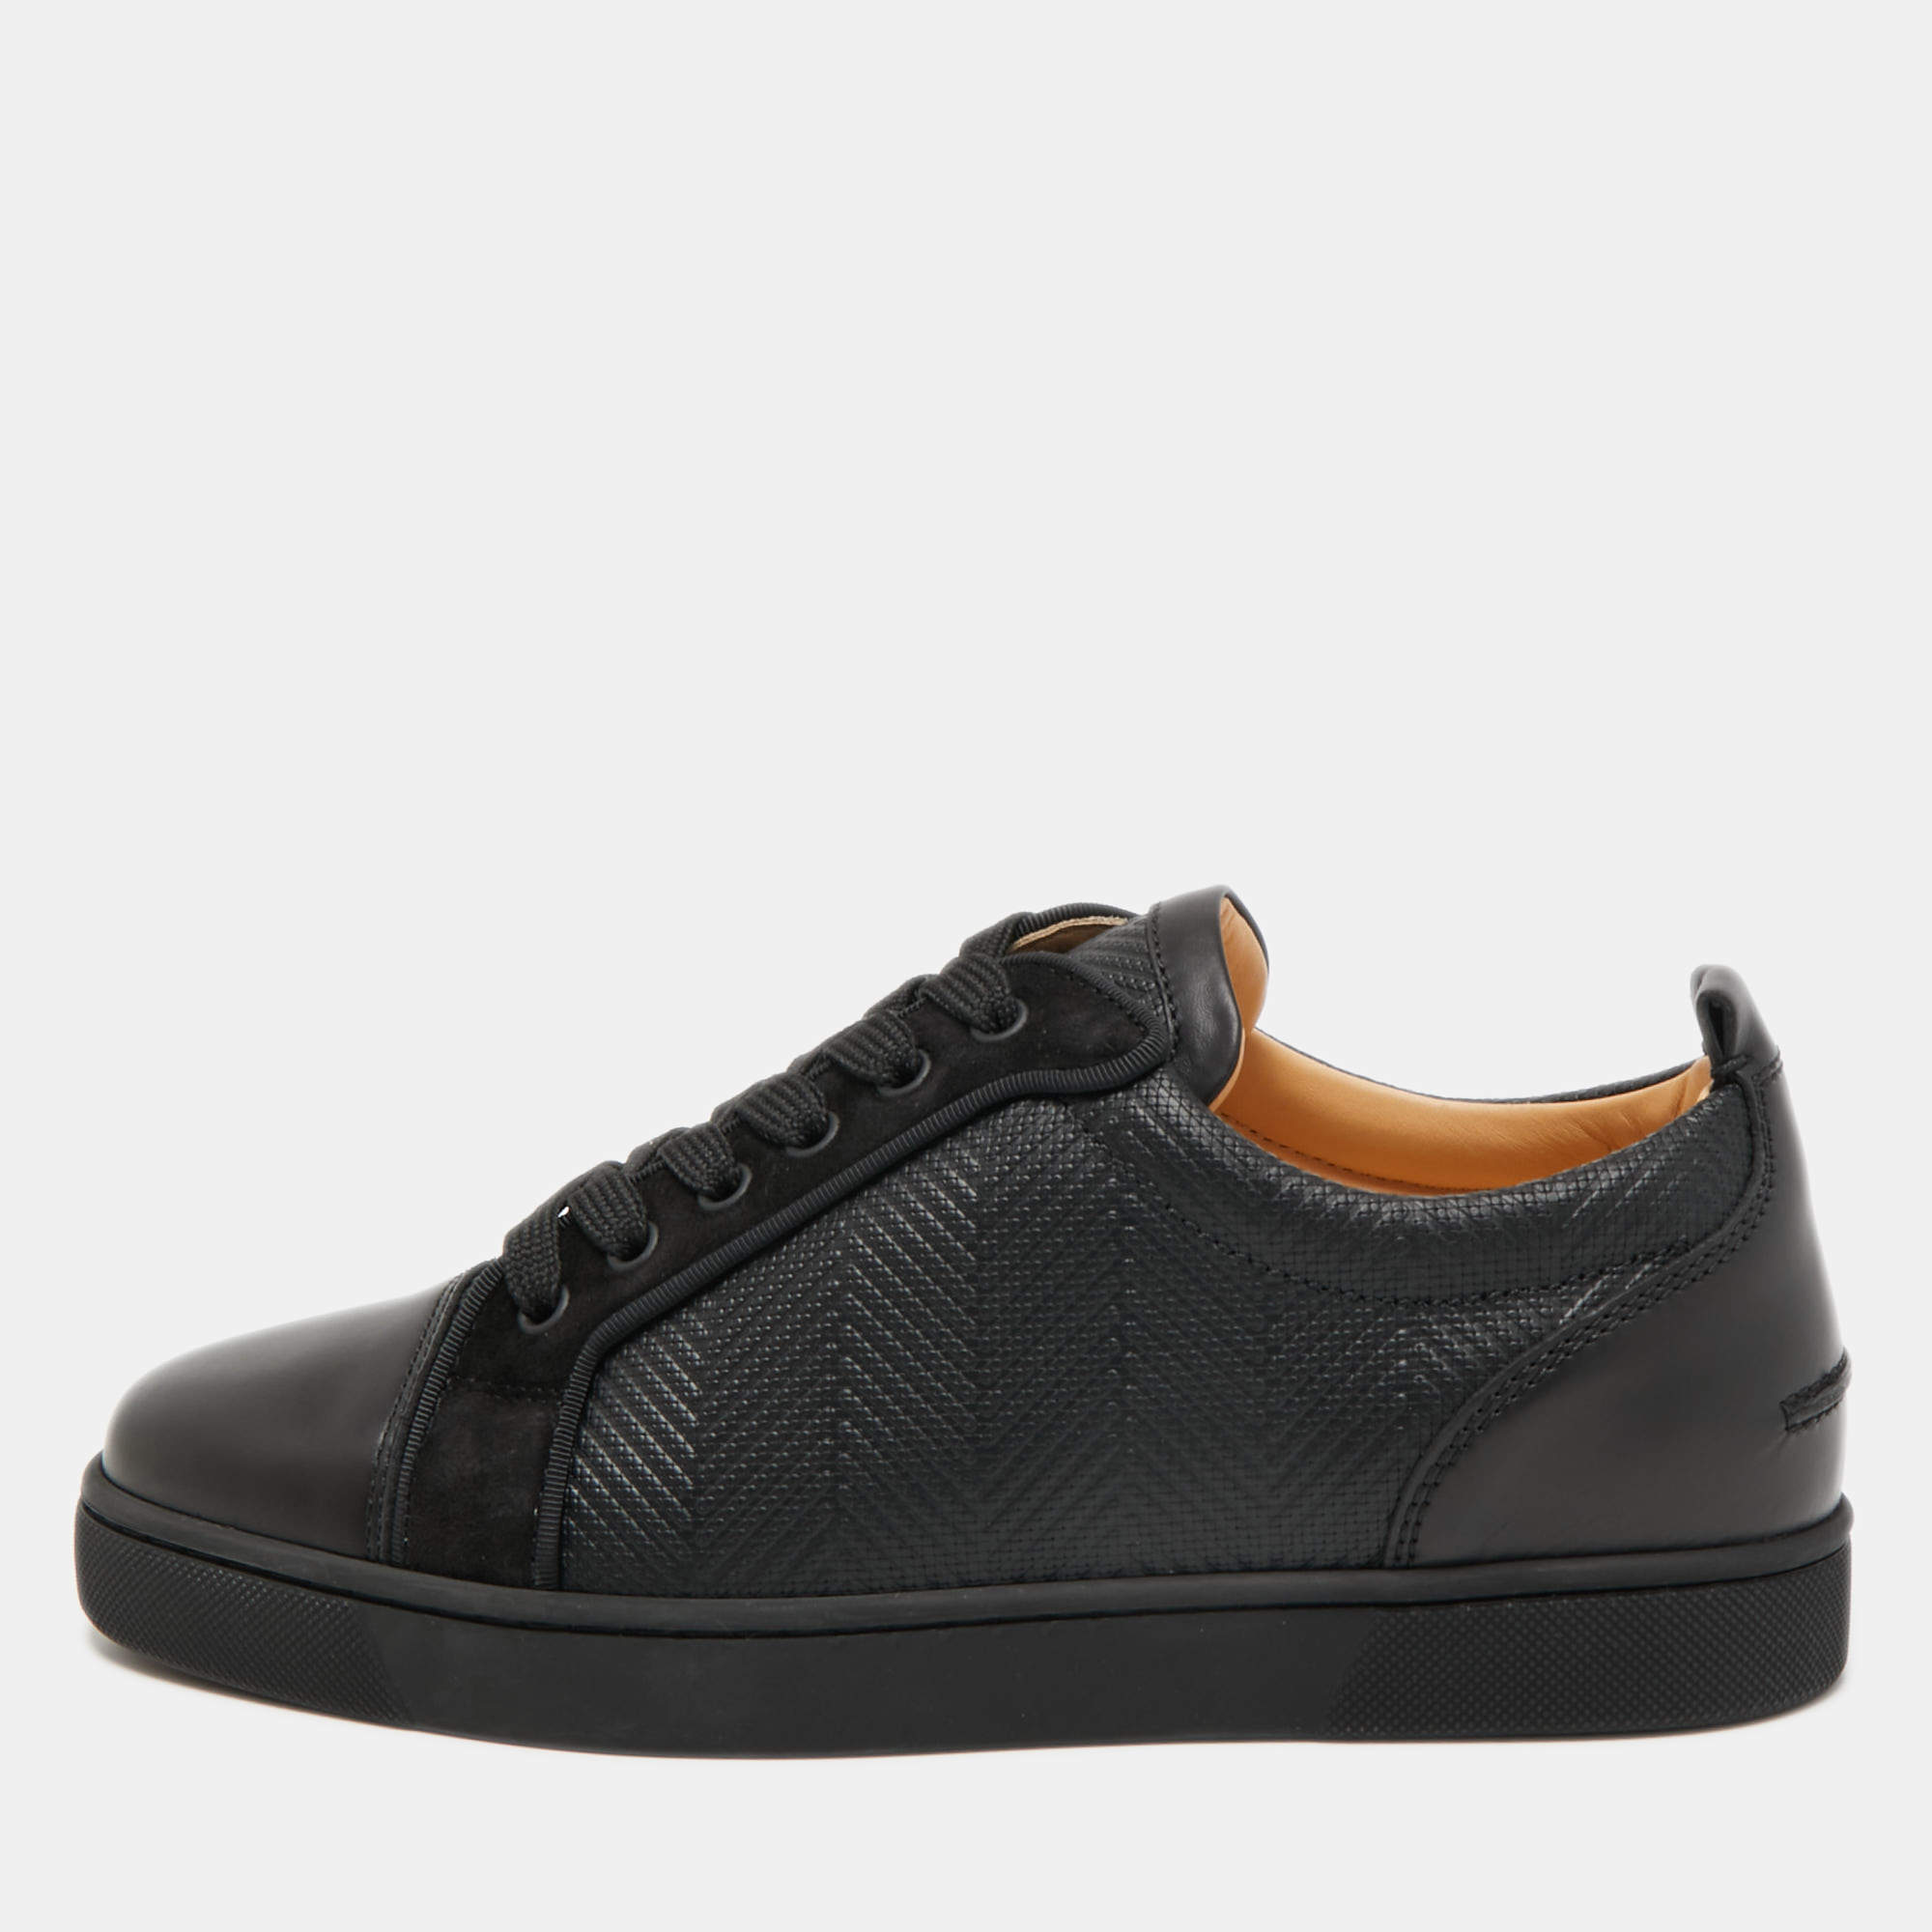 Louis Strass - Sneakers - Suede calf and strass - Black